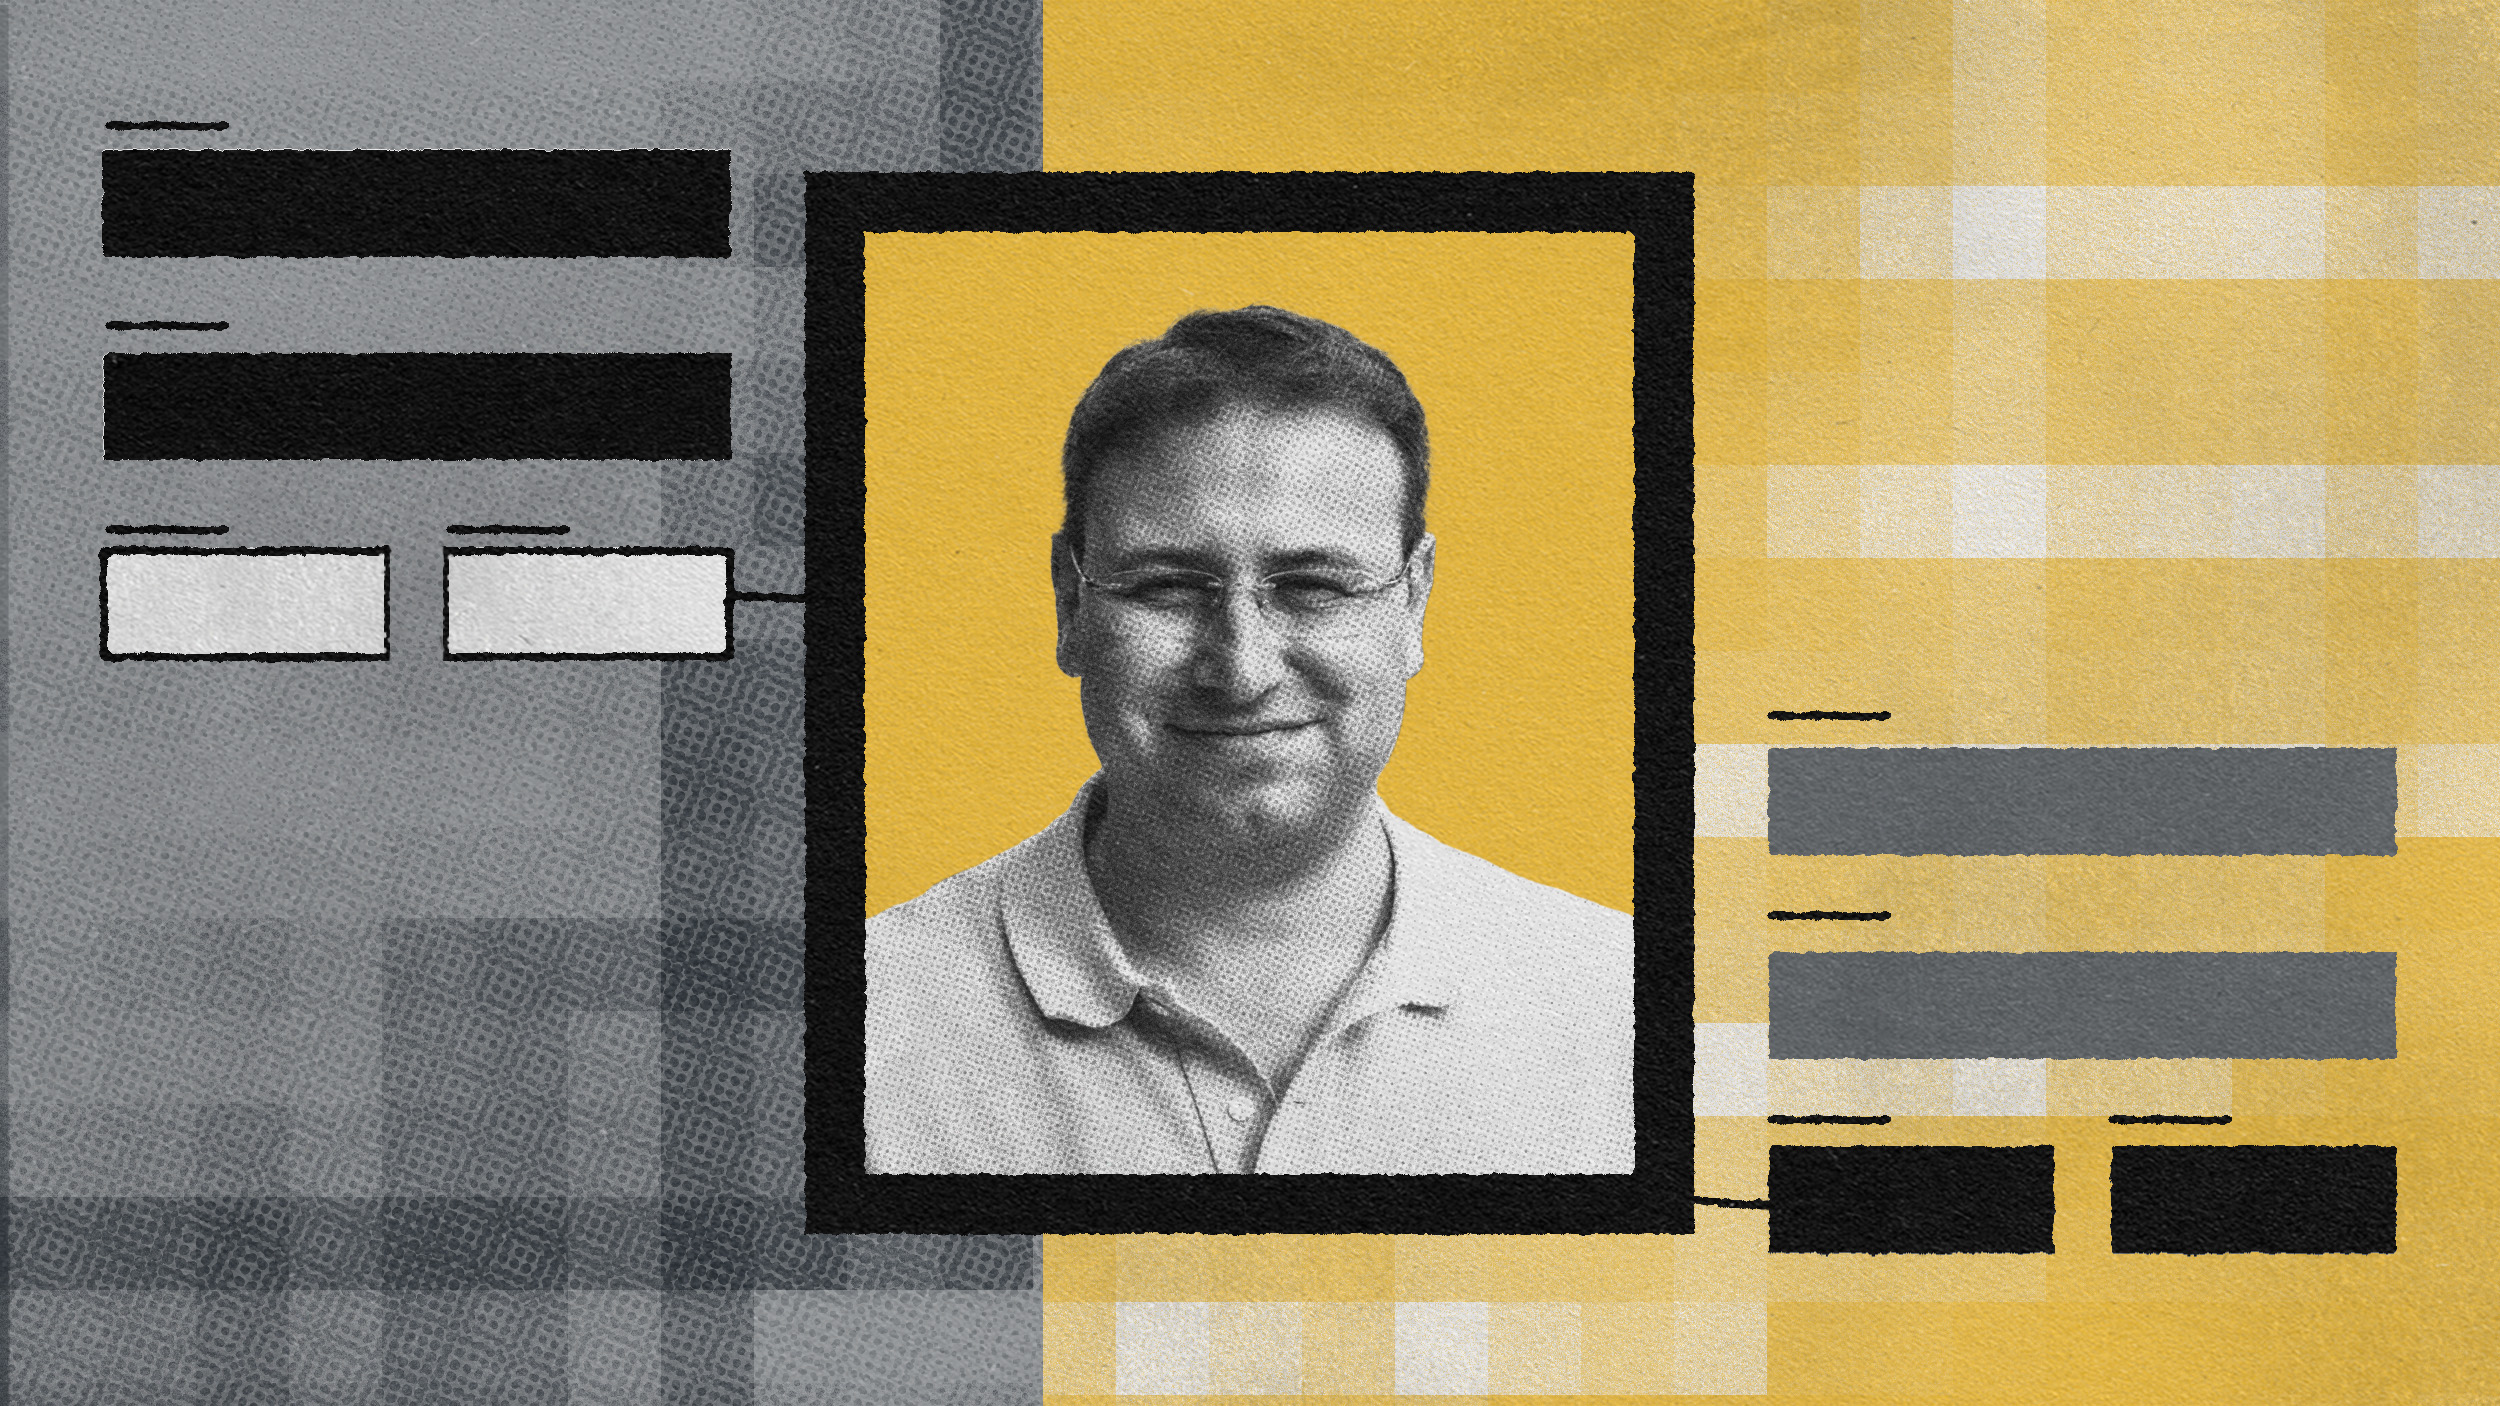 A grayscale image of a man inside a black frame with yellow, gray, and black geometric patterns in the background, subtly illustrating collaborative team skills.